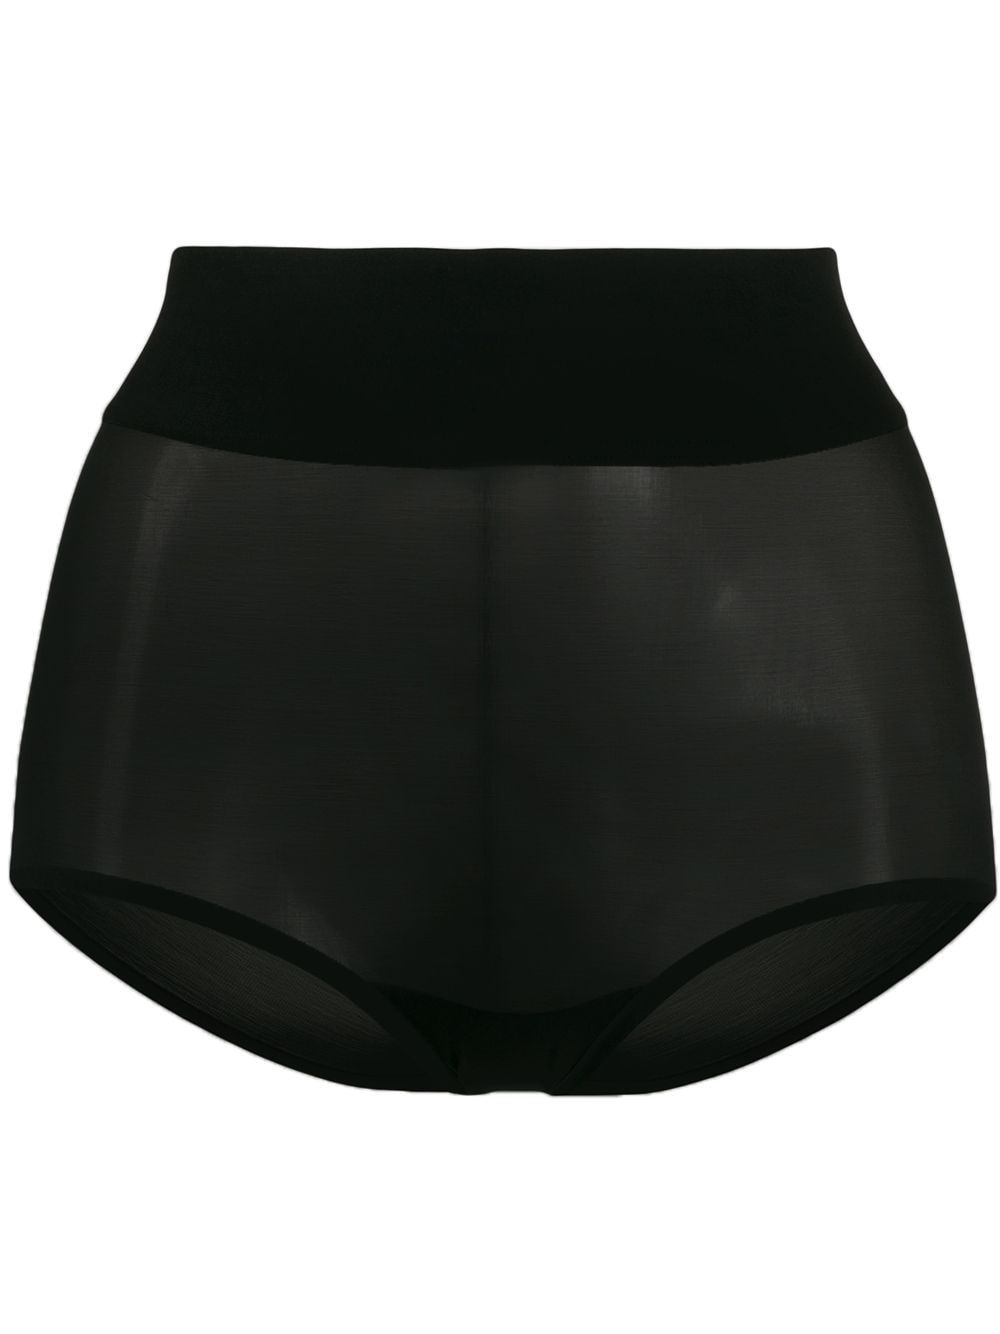 Wolford Sheer Touch Control panty - Black von Wolford